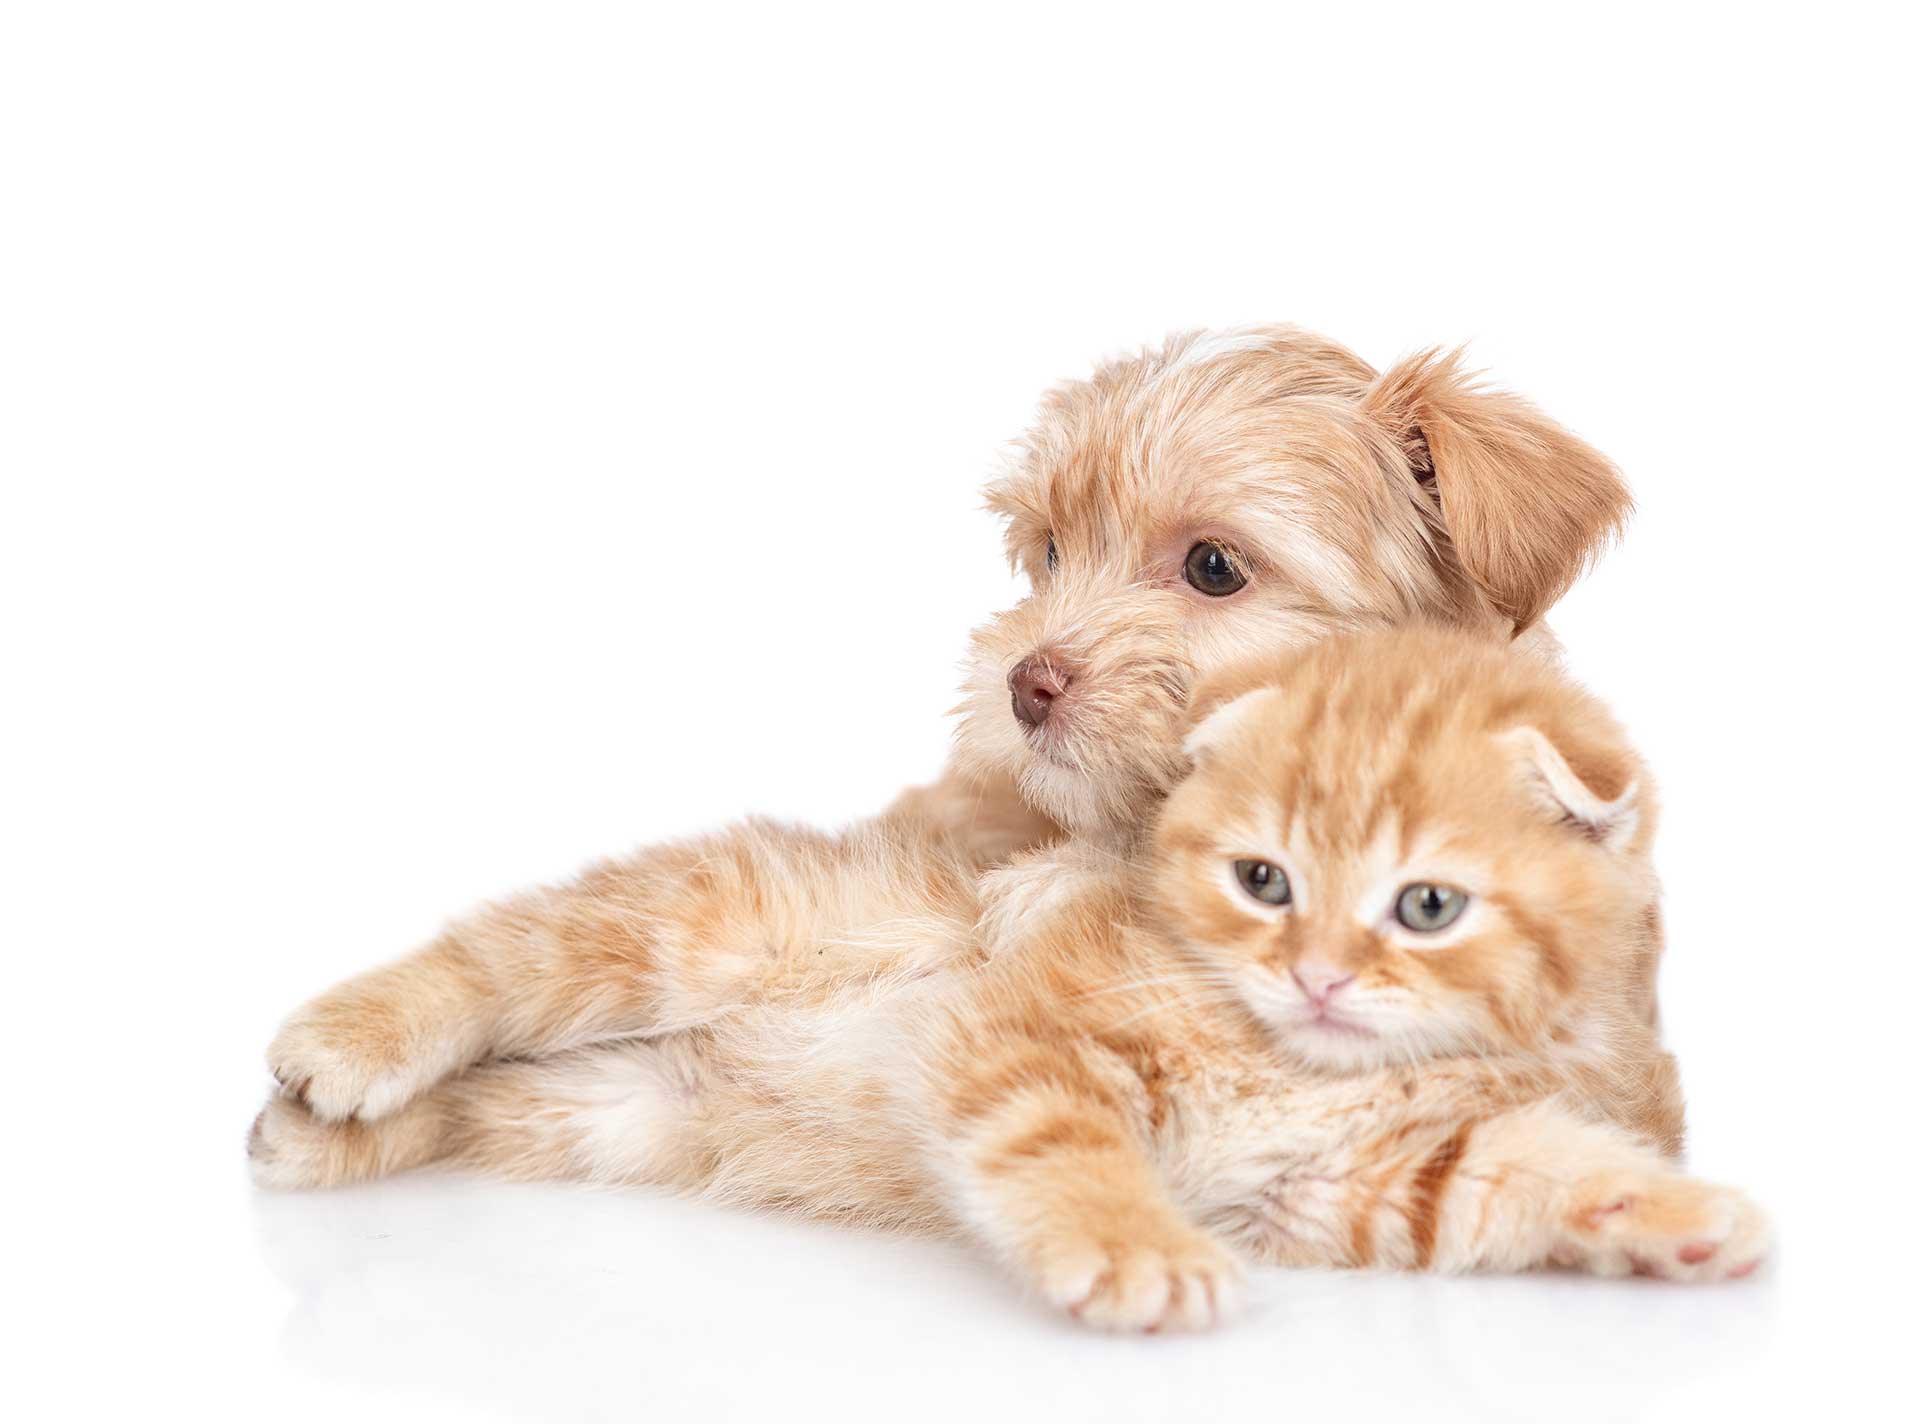 Pedigree dog and cat relaxing together